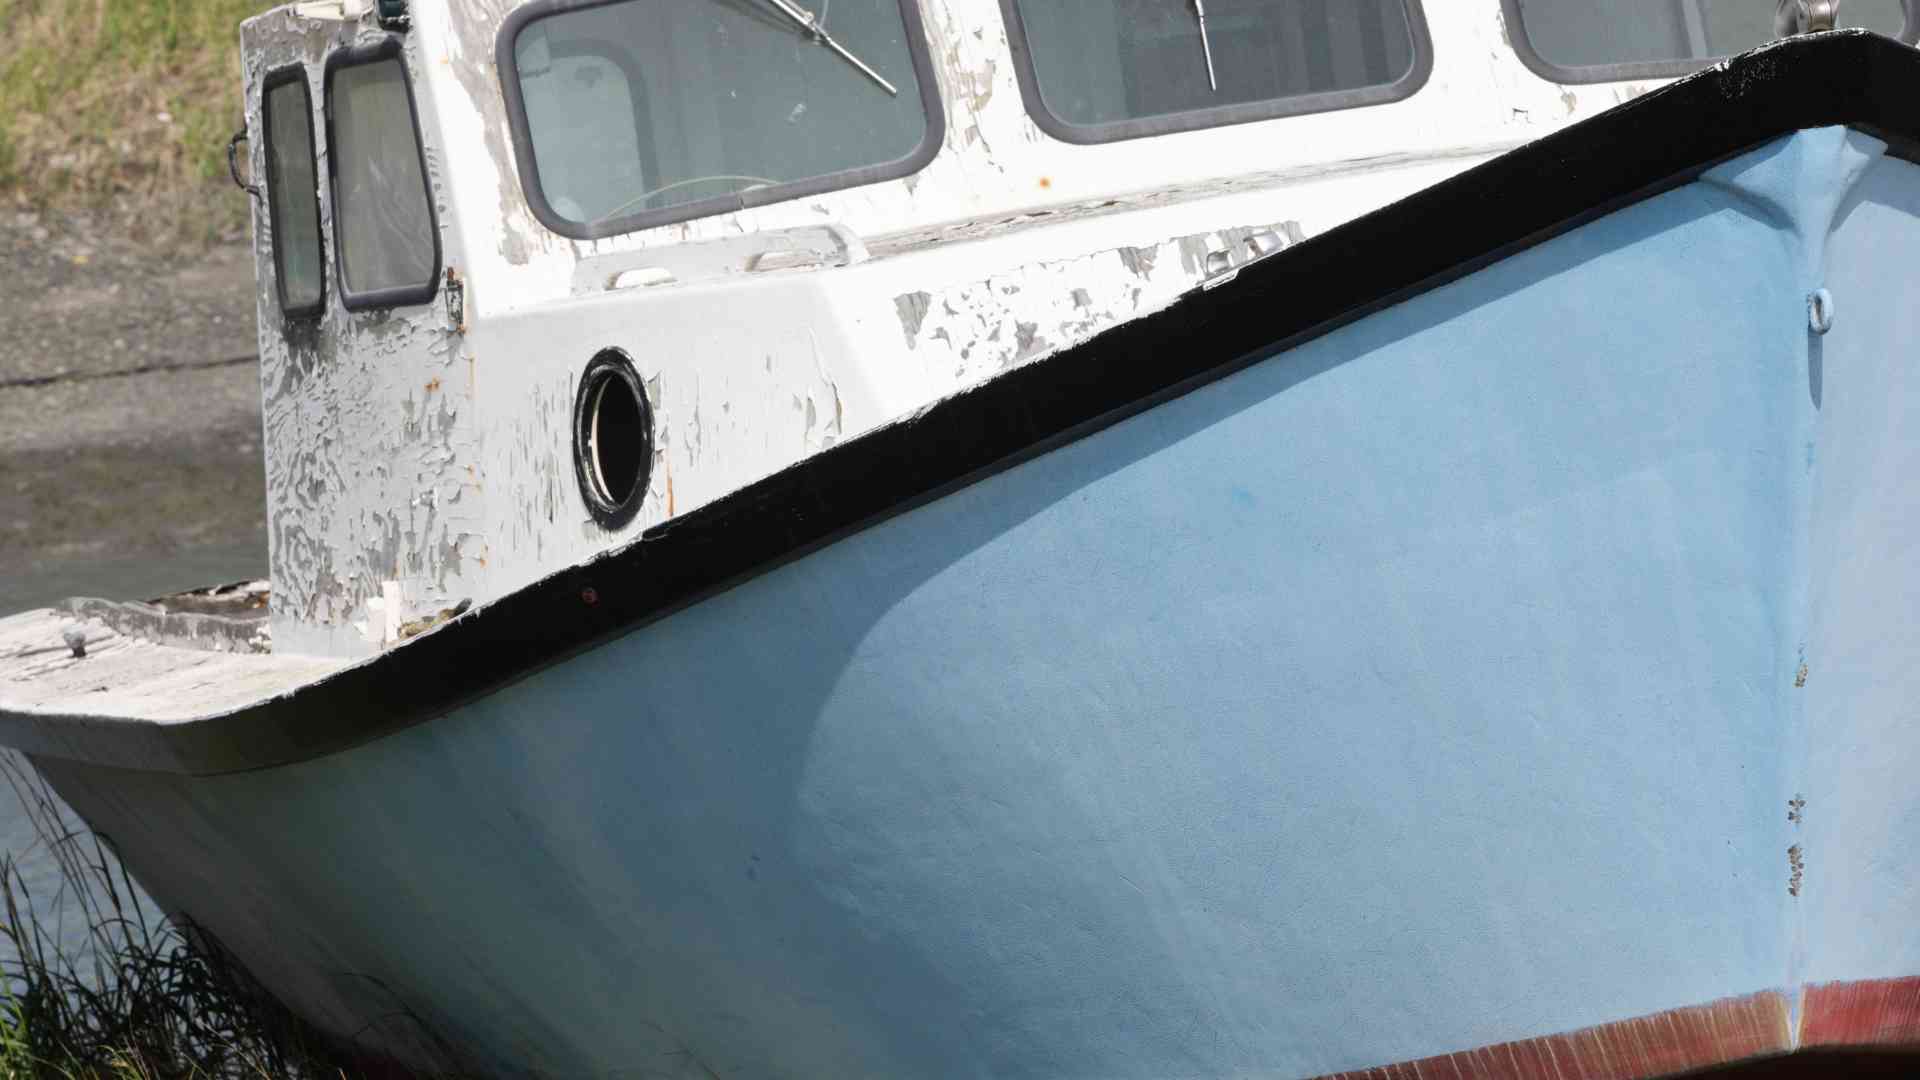 How can I prevent and treat osmotic blistering on a fiberglass boat hull